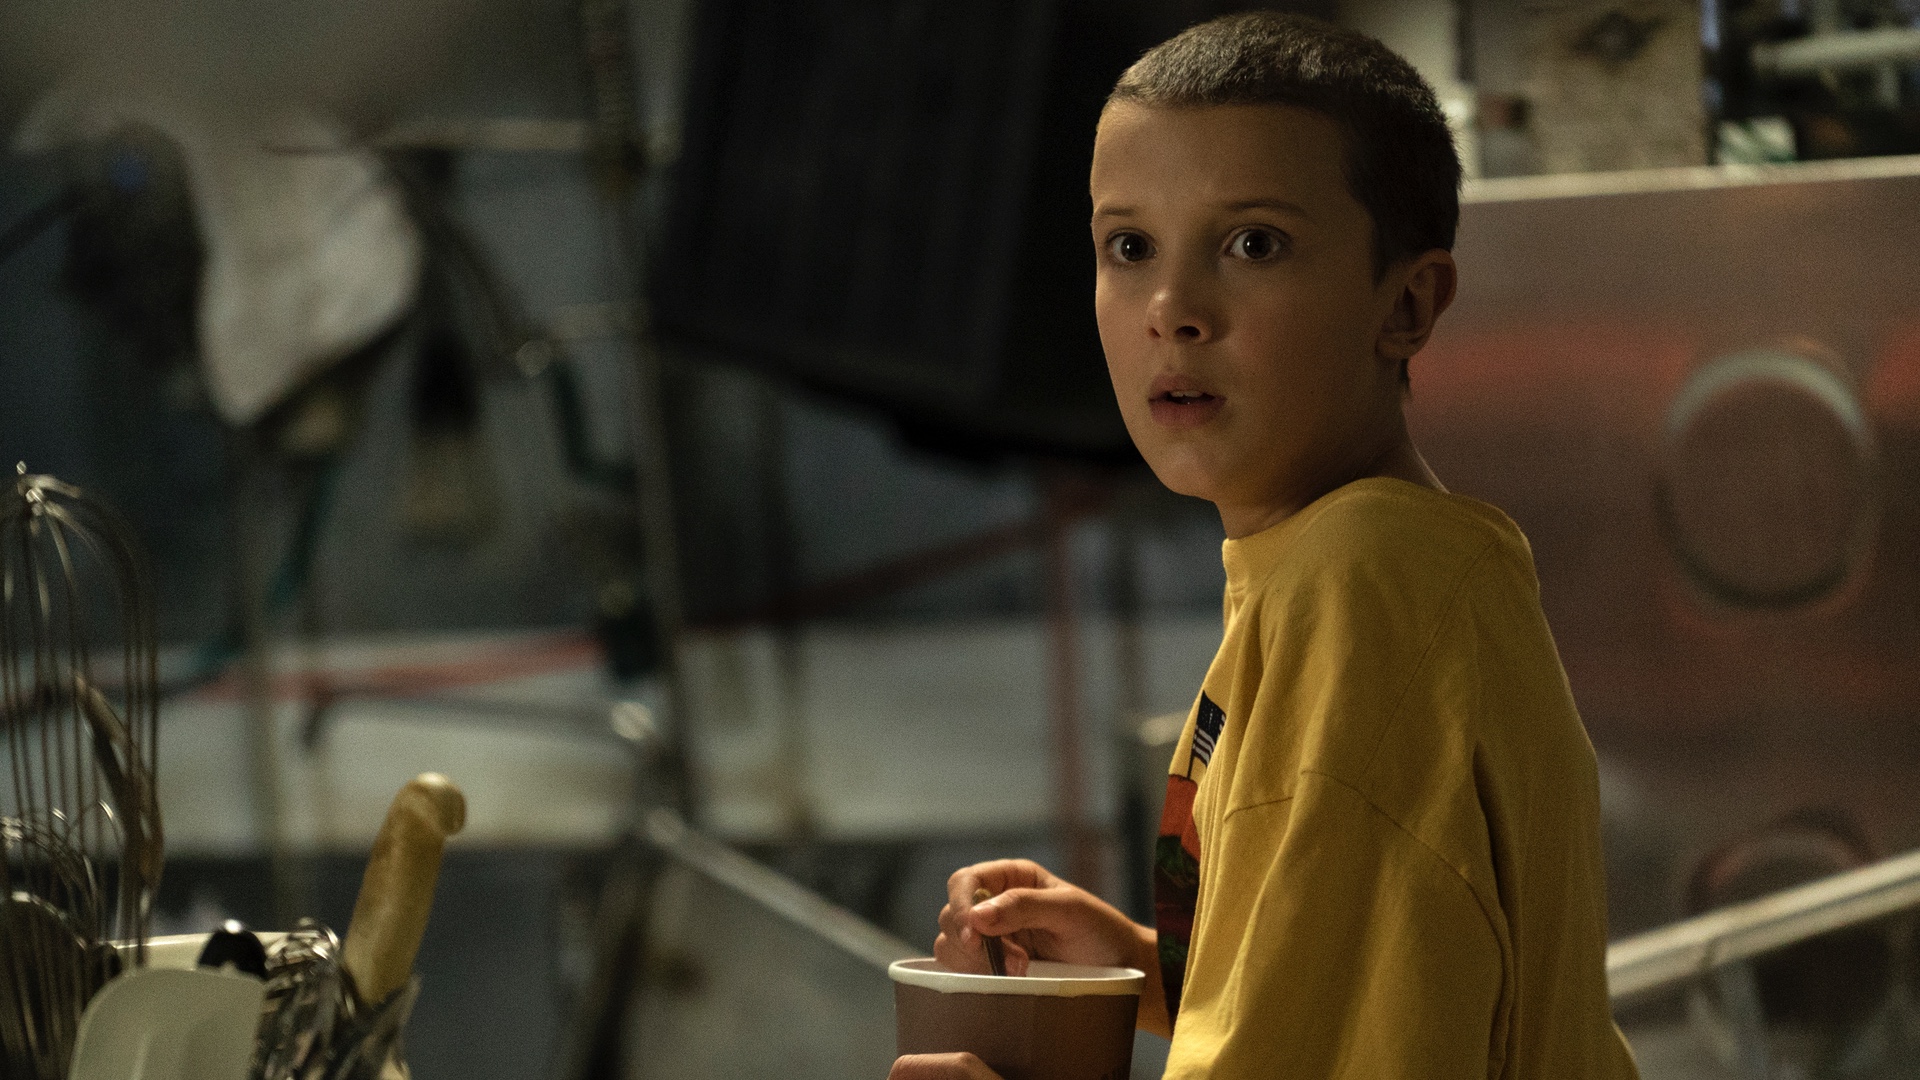 Godzilla King Of The Monsters Millie Bobby Brown Wallpapers